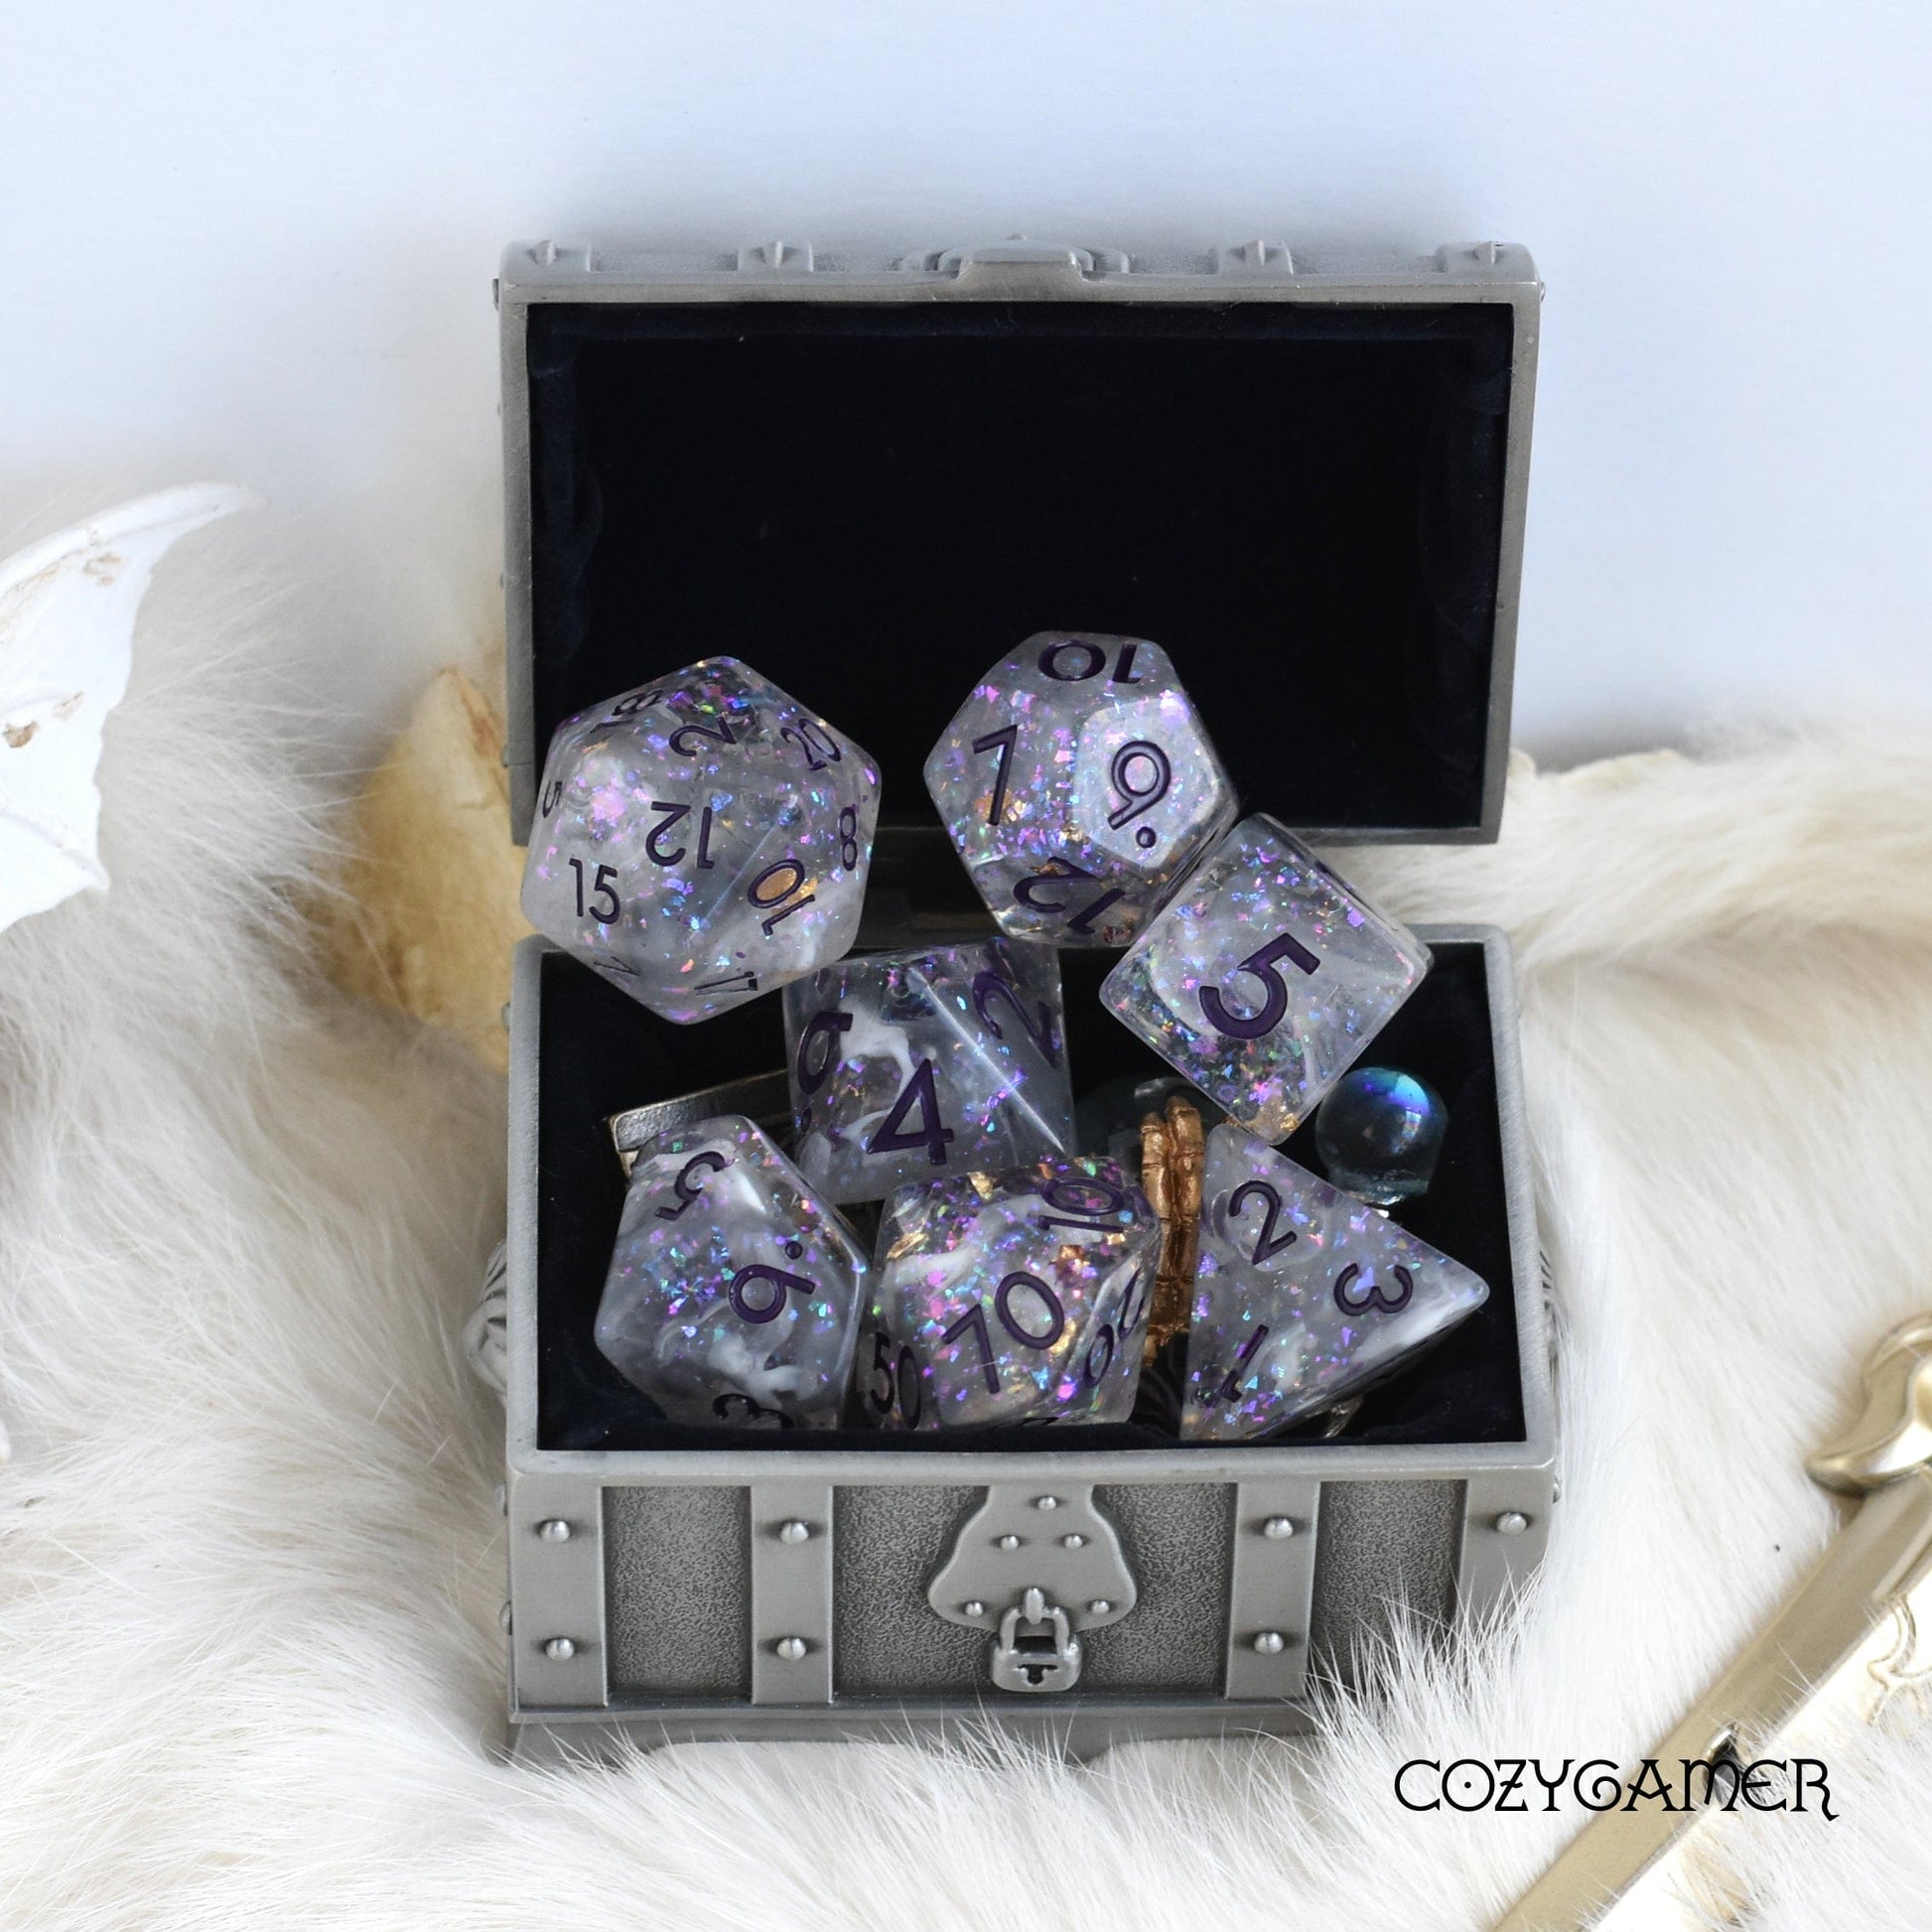 Necro Chanter Dice Set. Clear Resin with Glitter and a White Cloud